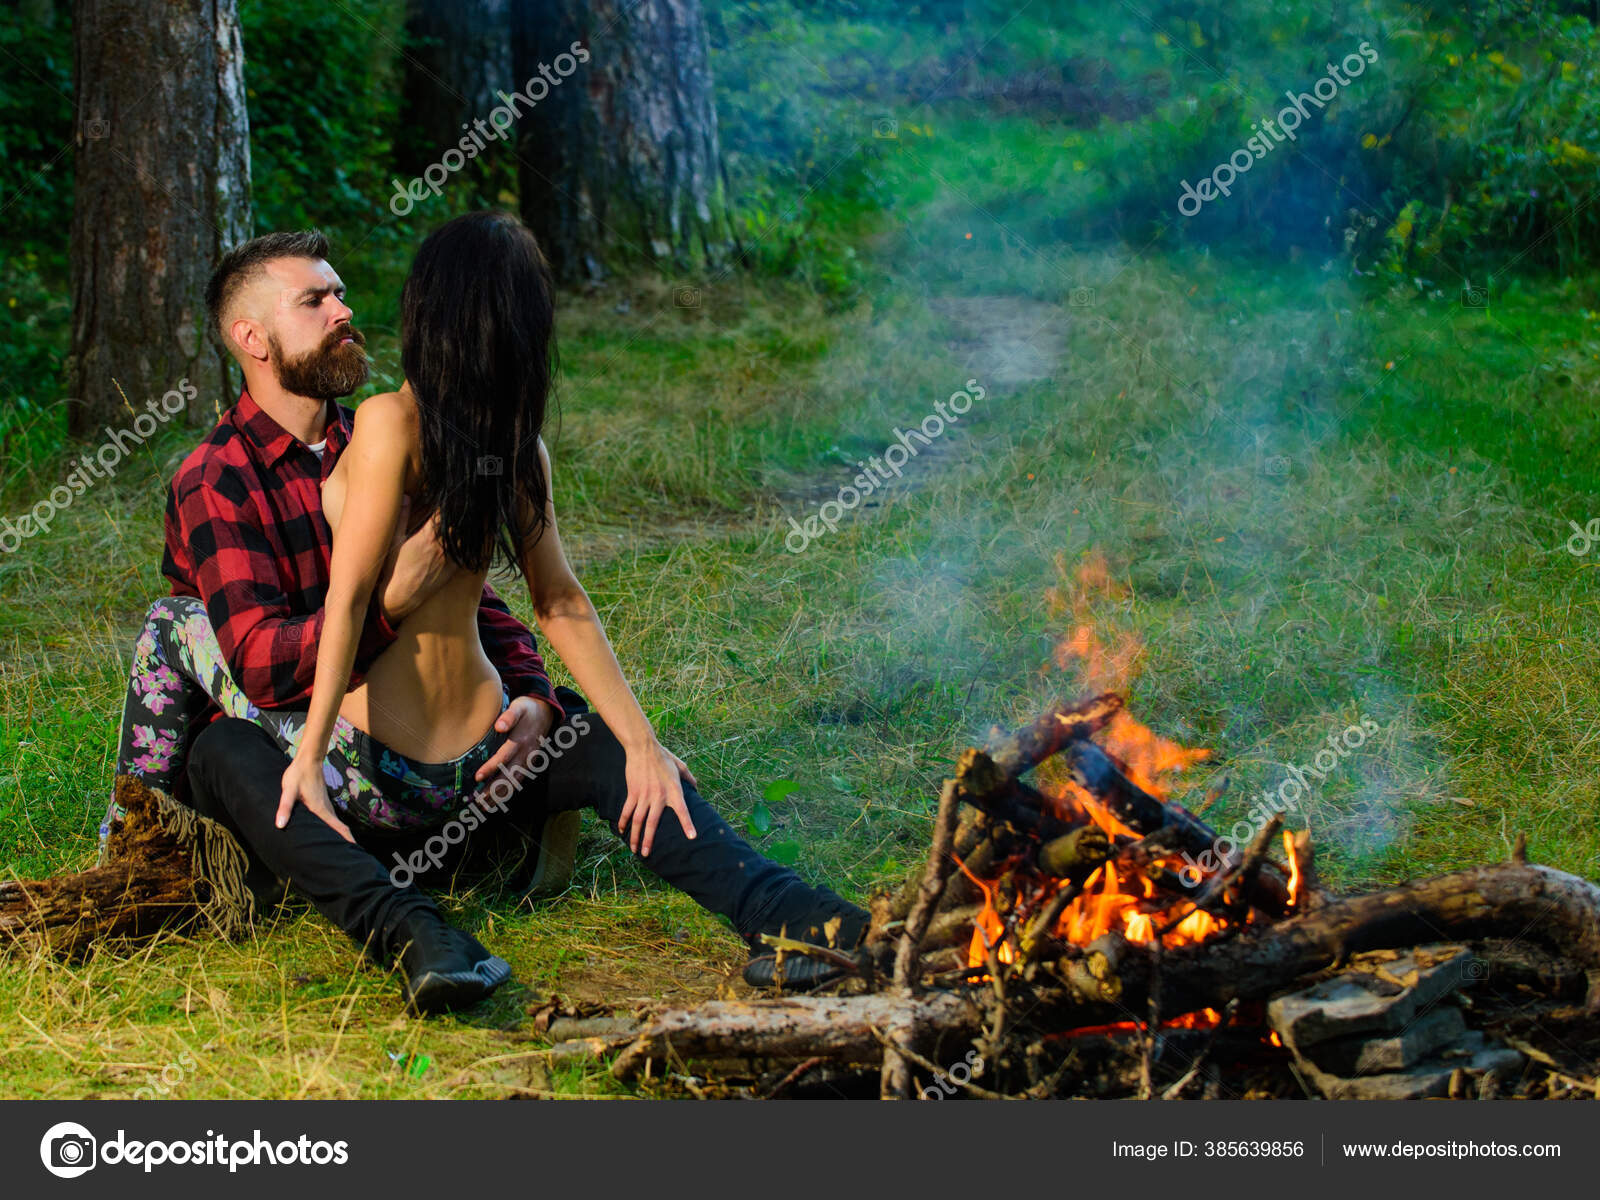 Couple full of desire going make love outdoor image image